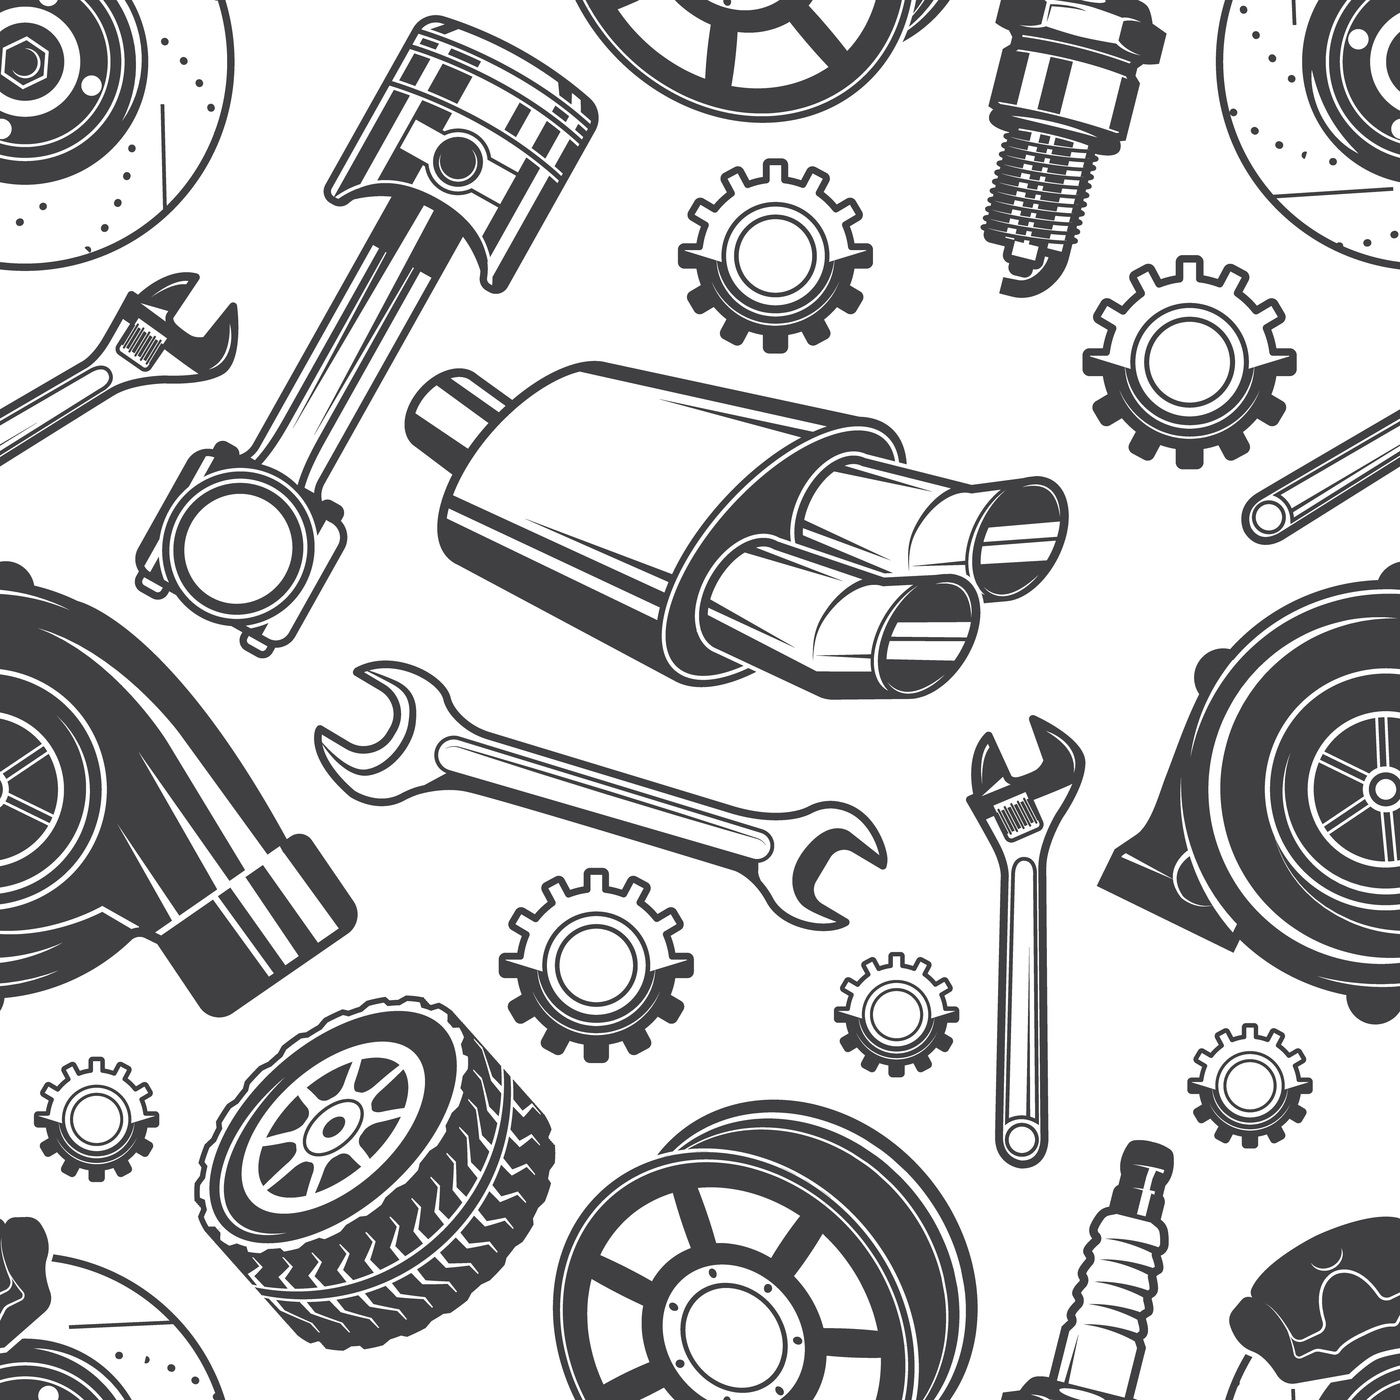 Madeliefje Bijdrage Geweldig Monochrome seamless pattern with automobile tools and details By ONYX |  TheHungryJPEG.com